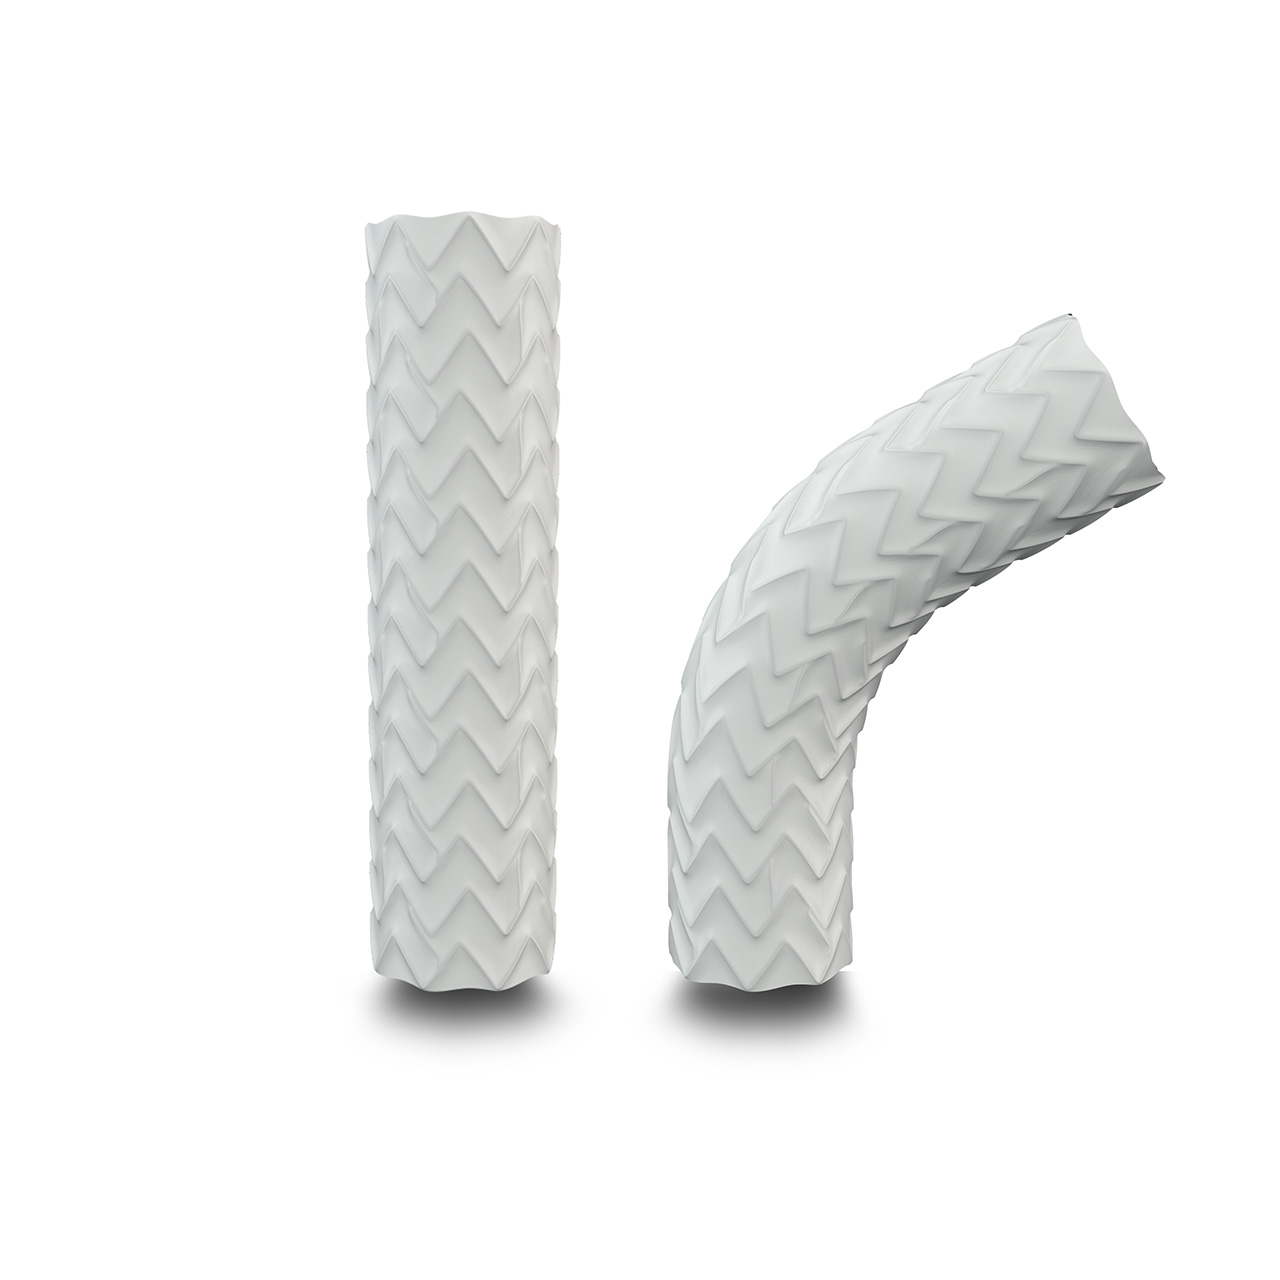 Balloon expandable covered stent.